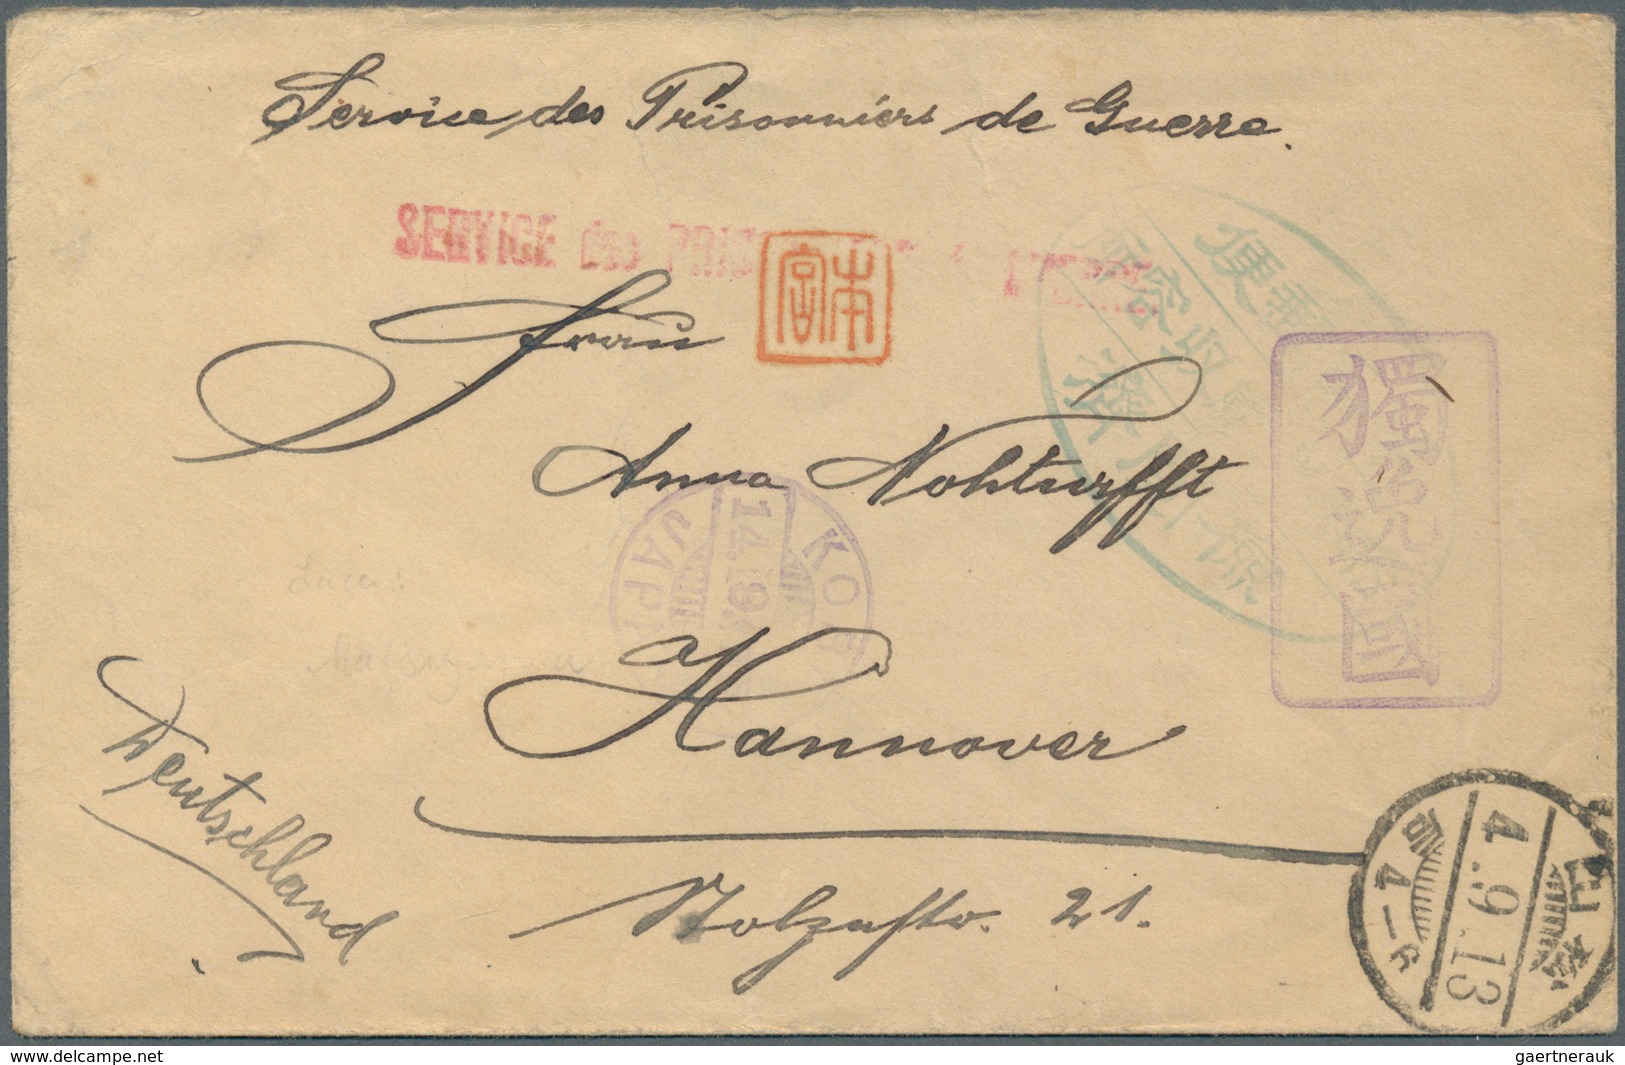 Lagerpost Tsingtau: Matsuyama, 1914/17, covers (4, one w. contents: acknowledgment of parcel), and m